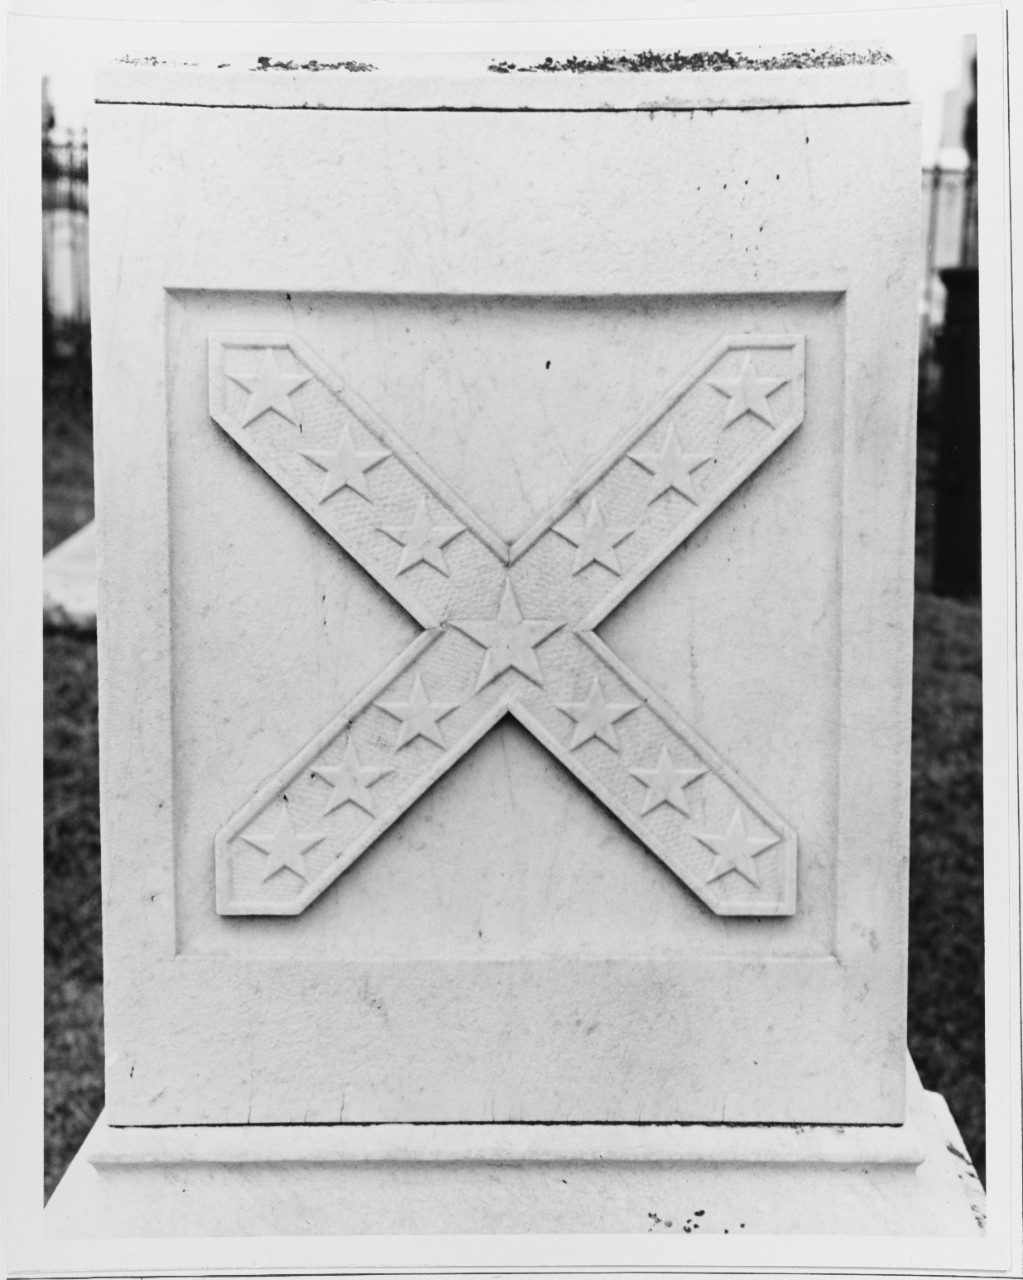 Monuments to James Waddell in St. Anne's Cemetery in Annapolis, Maryland, June, 1965